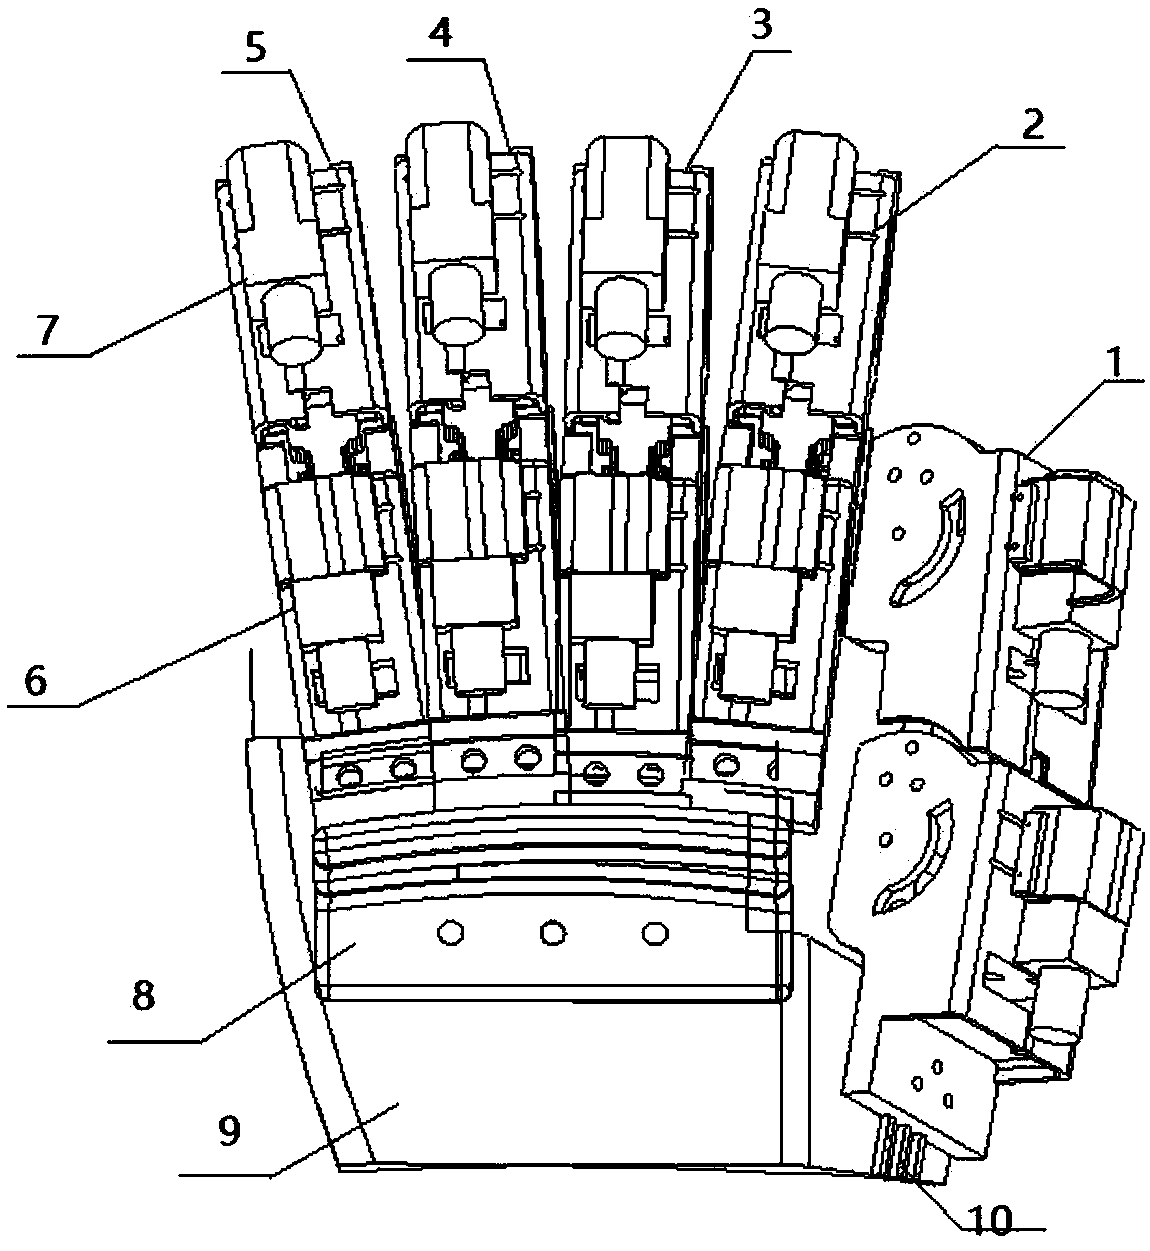 Rehabilitation mechanical hand with independently adjustable distances among fingers and detachable five fingers